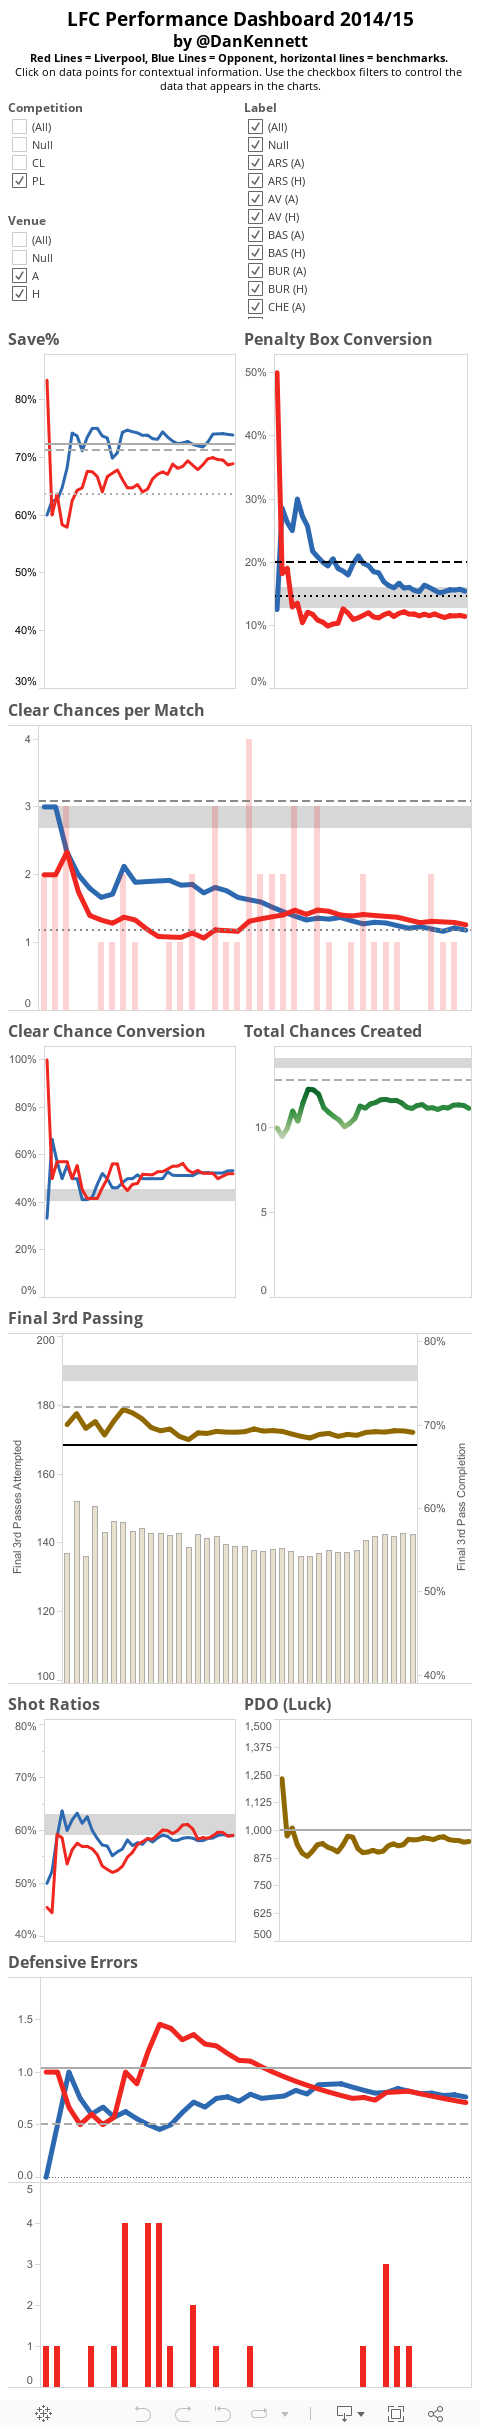 LFC Performance Dashboard 2014/15by @DanKennettRed Lines = Liverpool, Blue Lines = Opponent, horizontal lines = benchmarks. Click on data points for contextual information. Use the checkbox filters to control the data that appears in the charts.Summar 